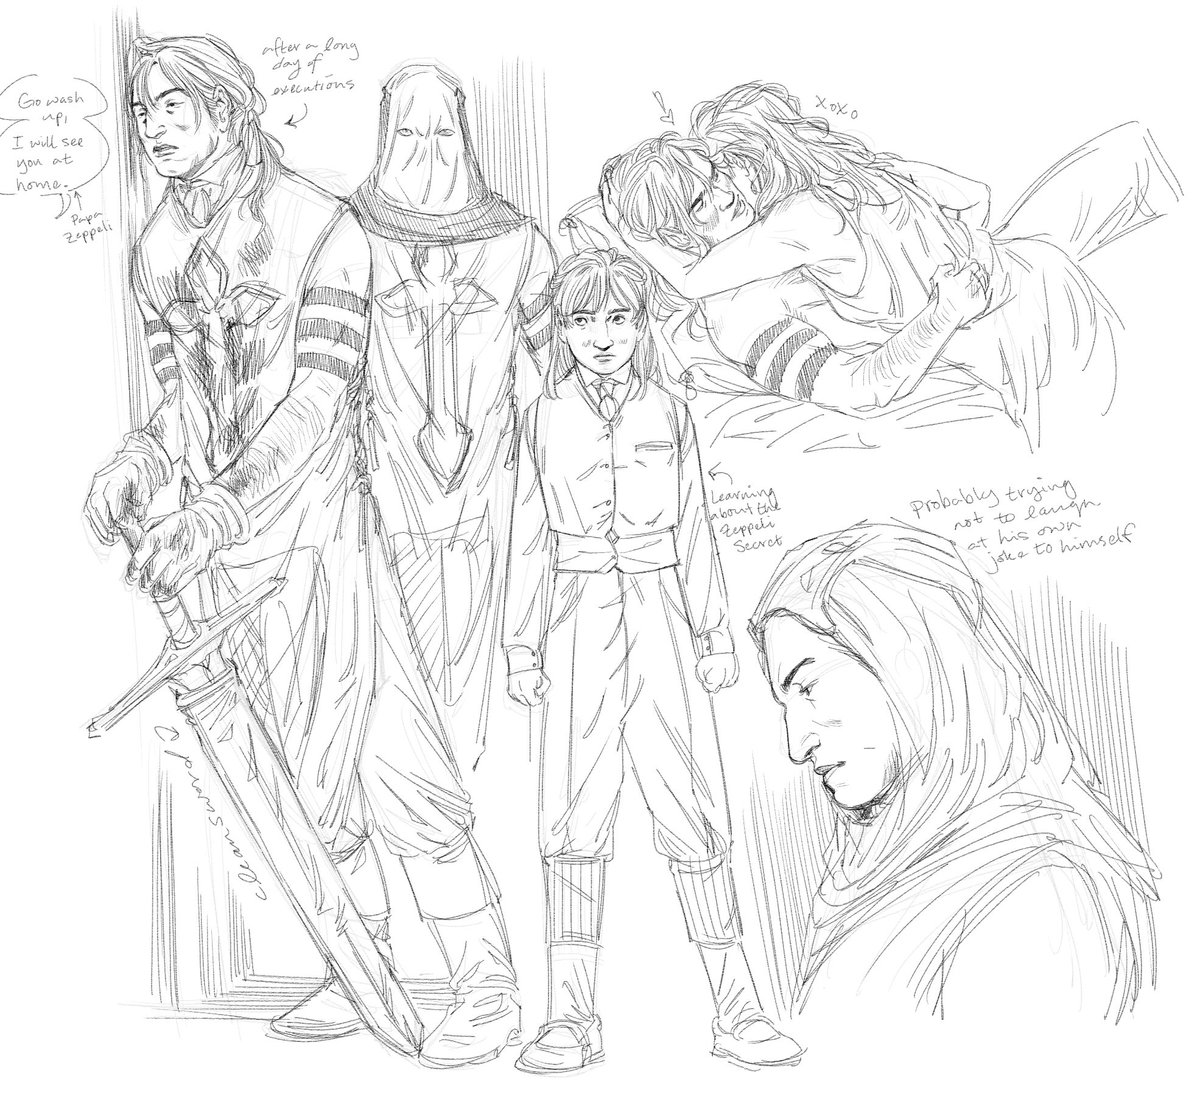 Messy Gyro doodles